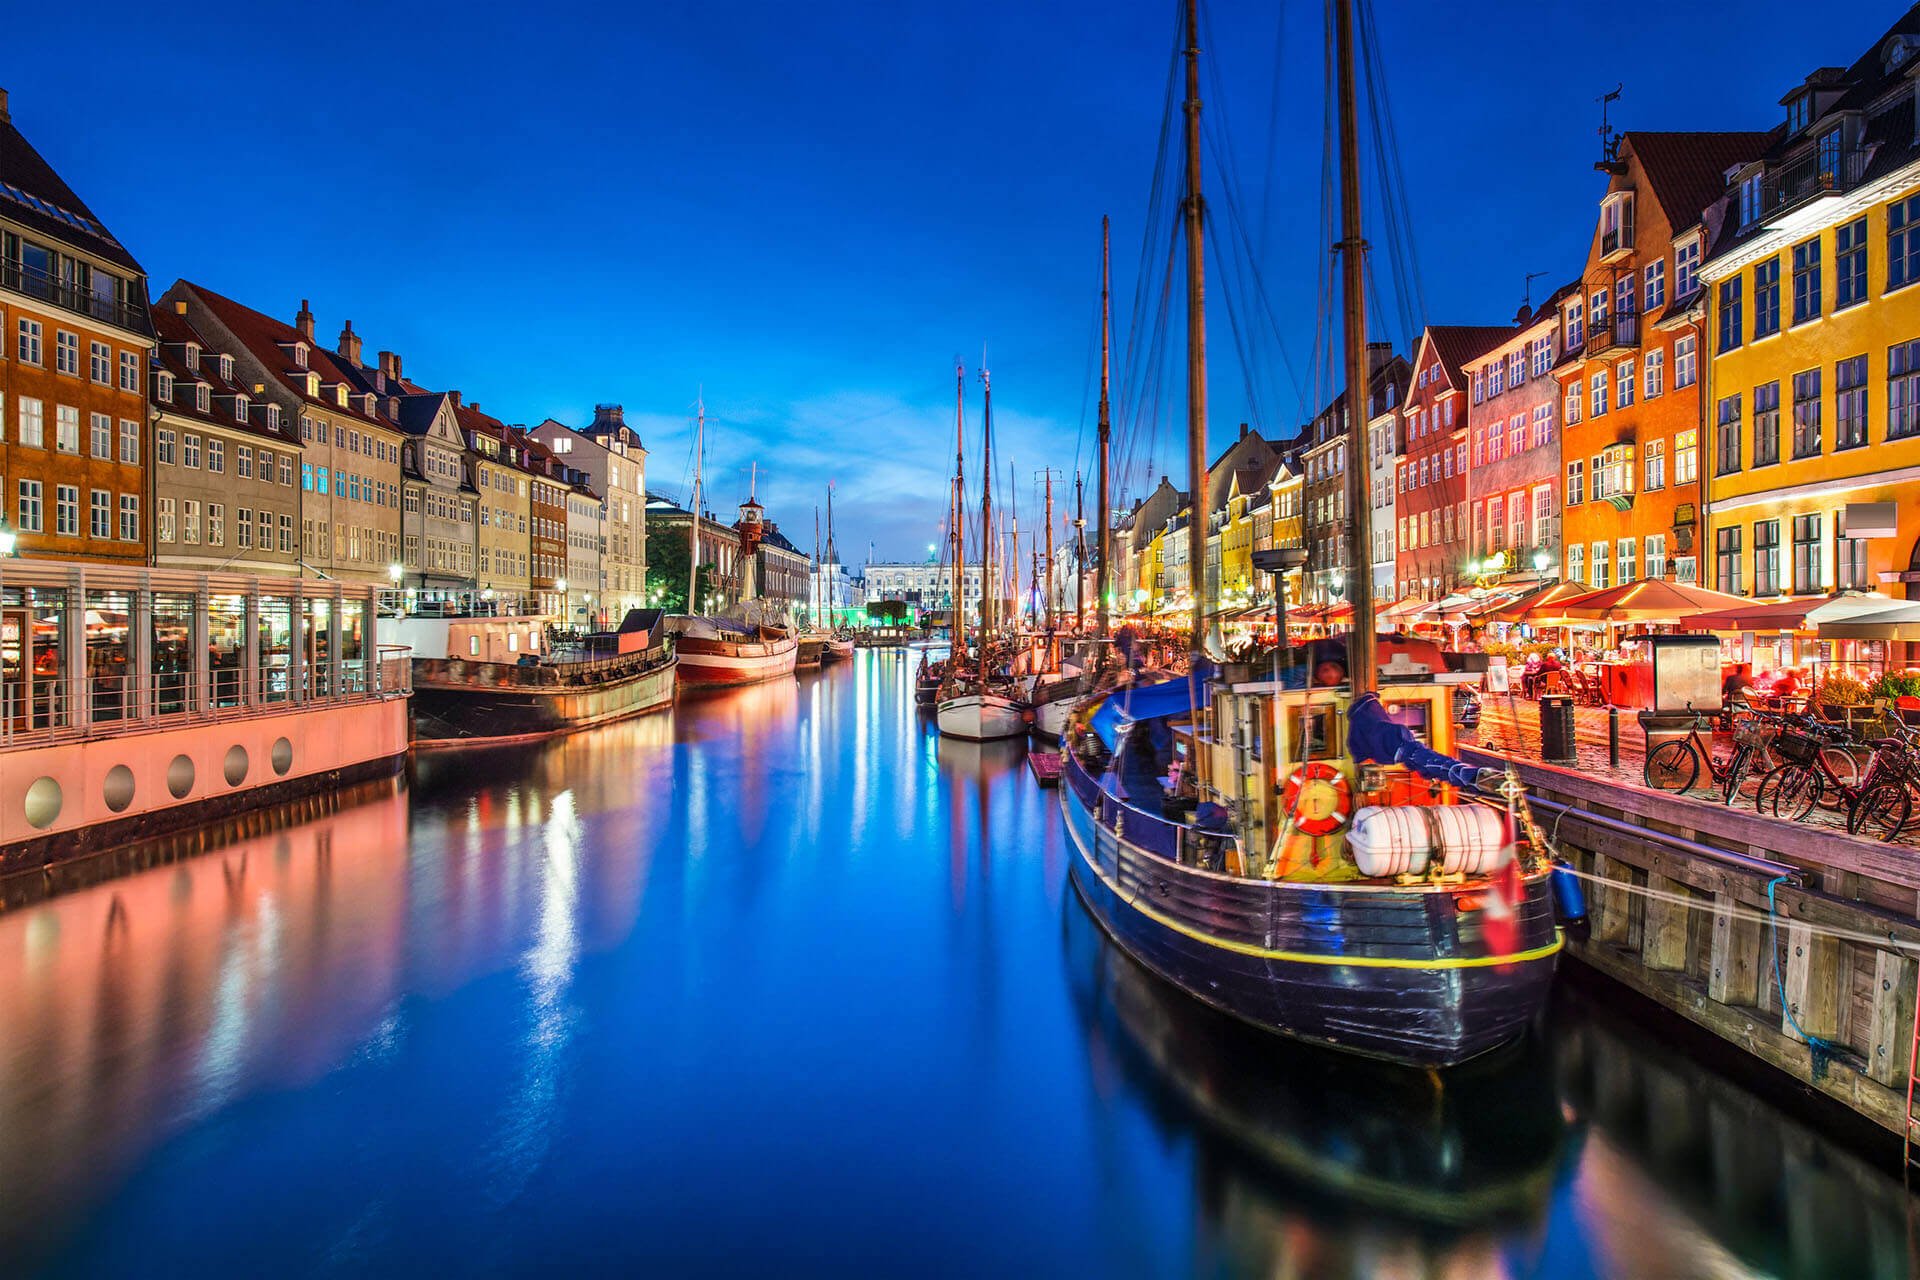 Denmark: Danish Bank Account Required for Certain Permit Holders